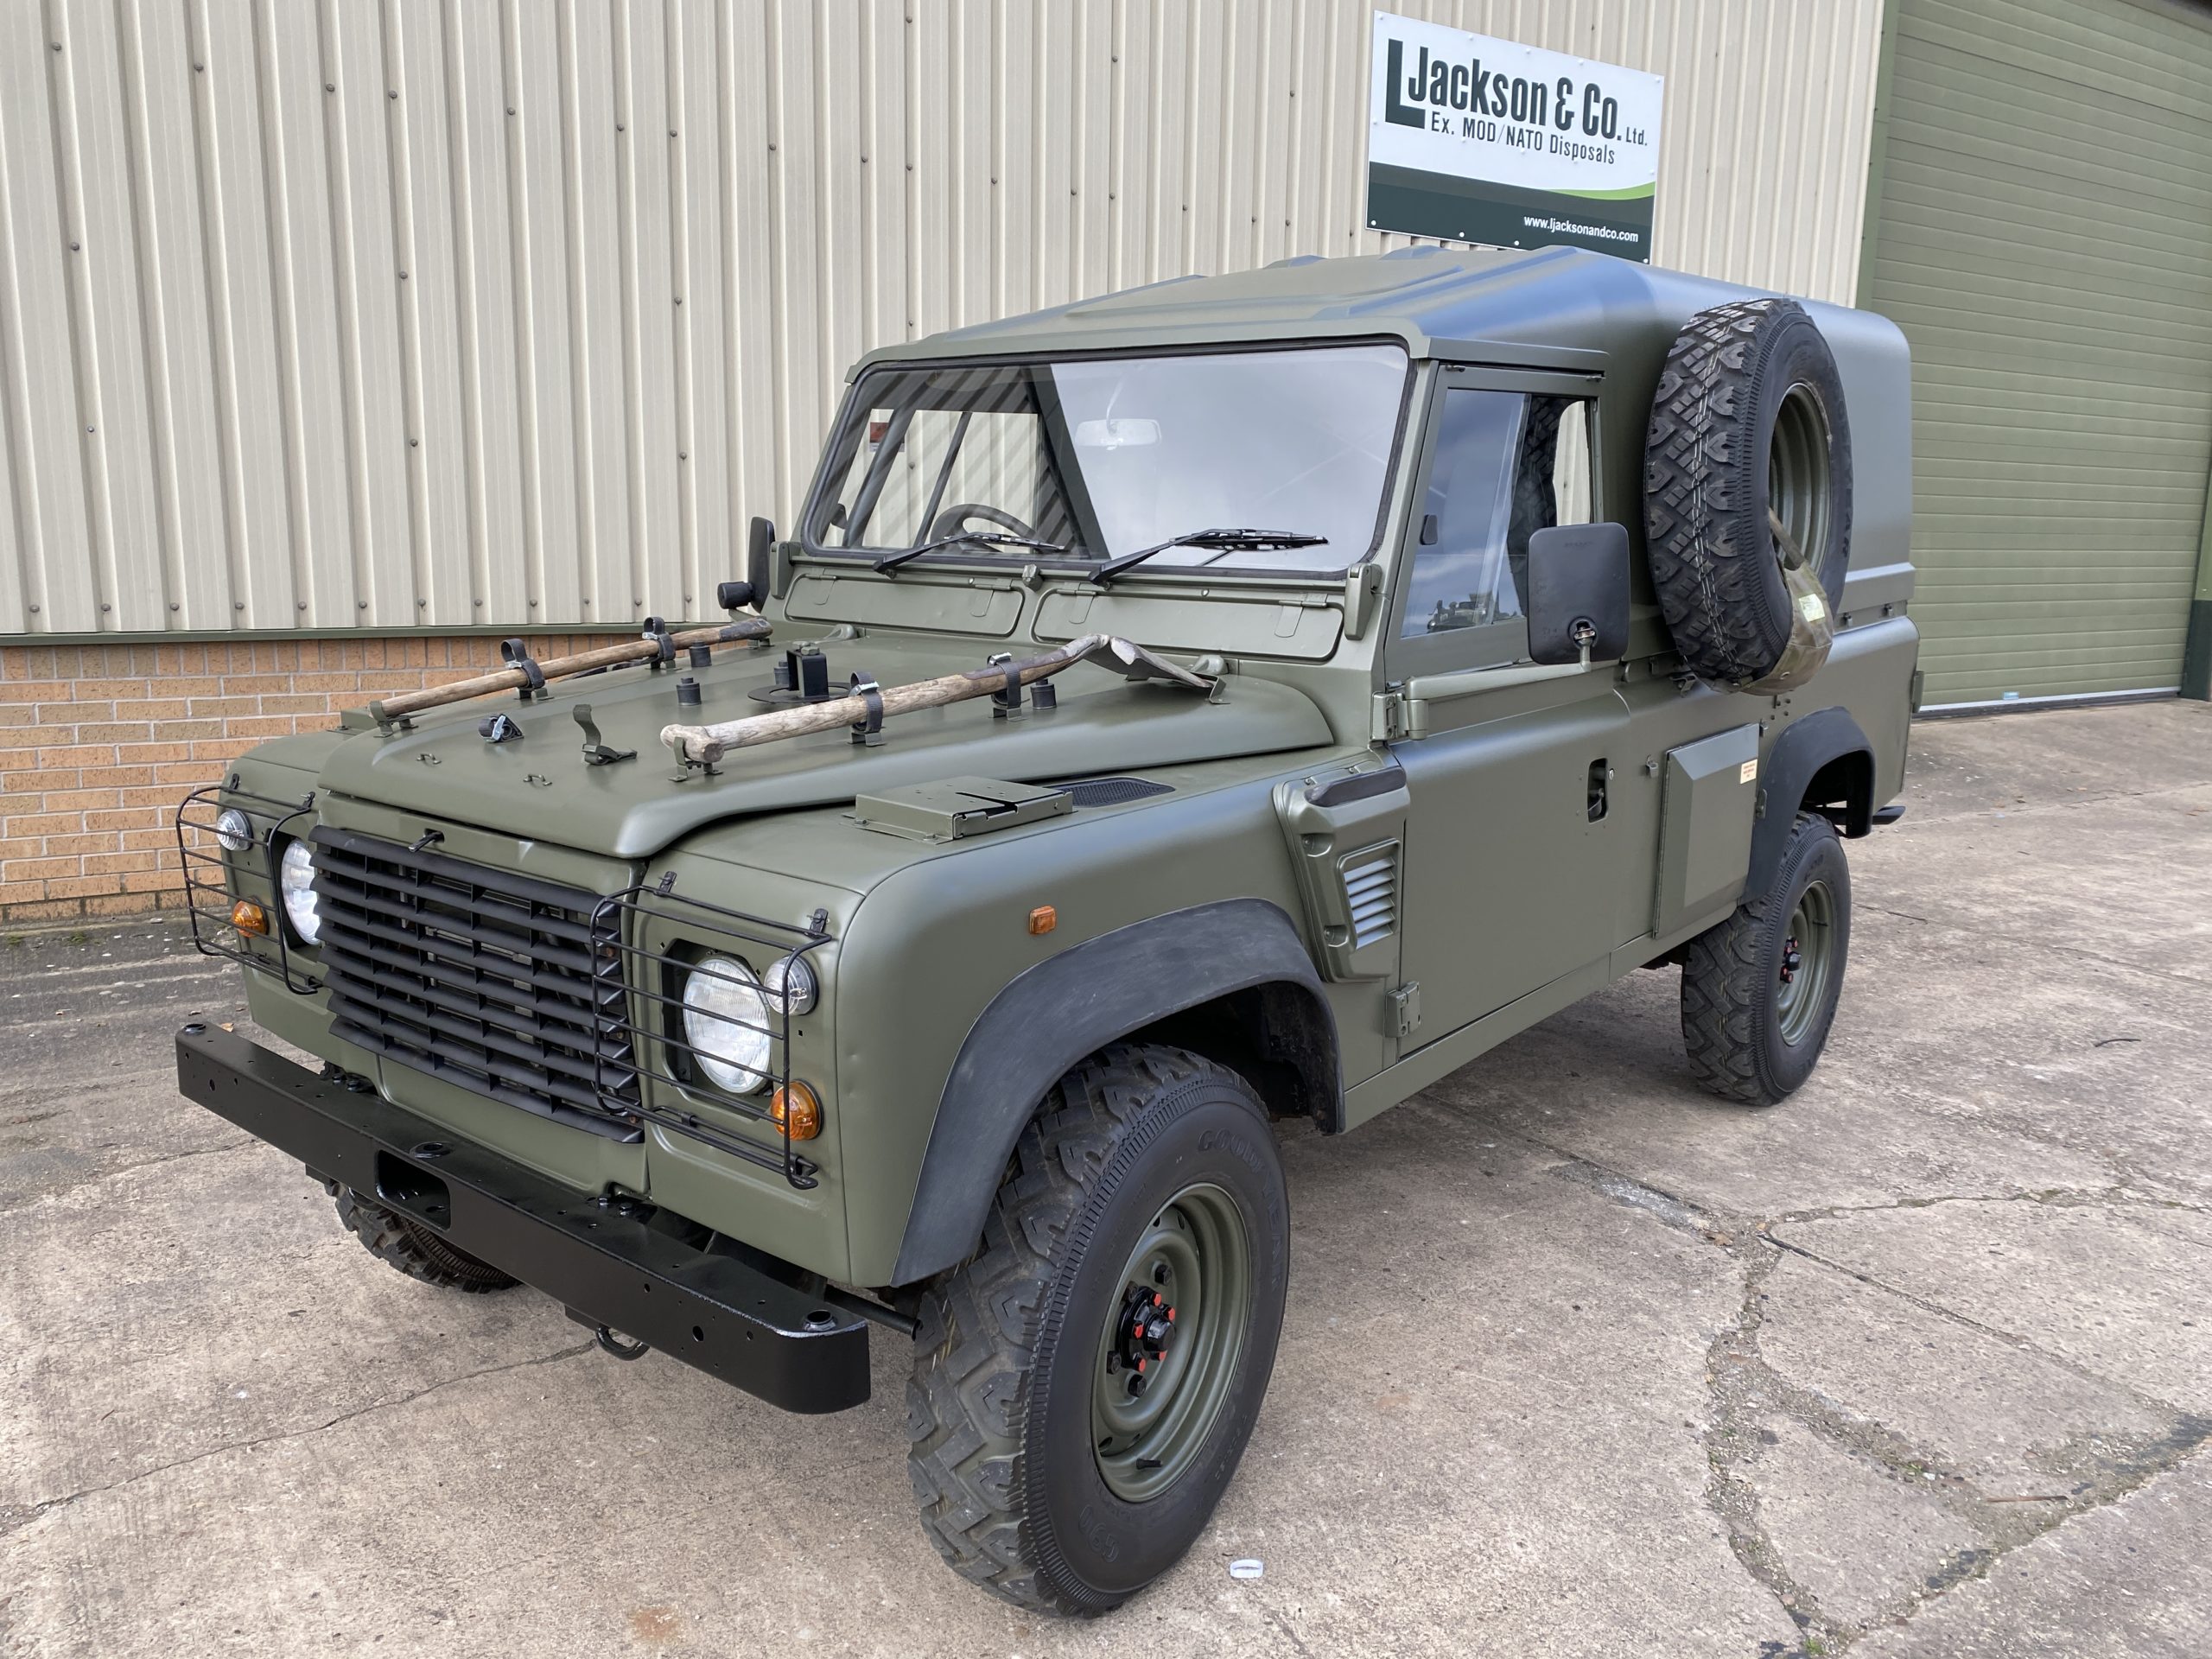 wenselijk Specimen Momentum Land Rover Defender Wolf 110 Hard Top | L Jackson & Co - Military vehicles for  sale - We sell Ex Military Land Rovers, Ex army trucks, MoD Surplus, Ex  Military and